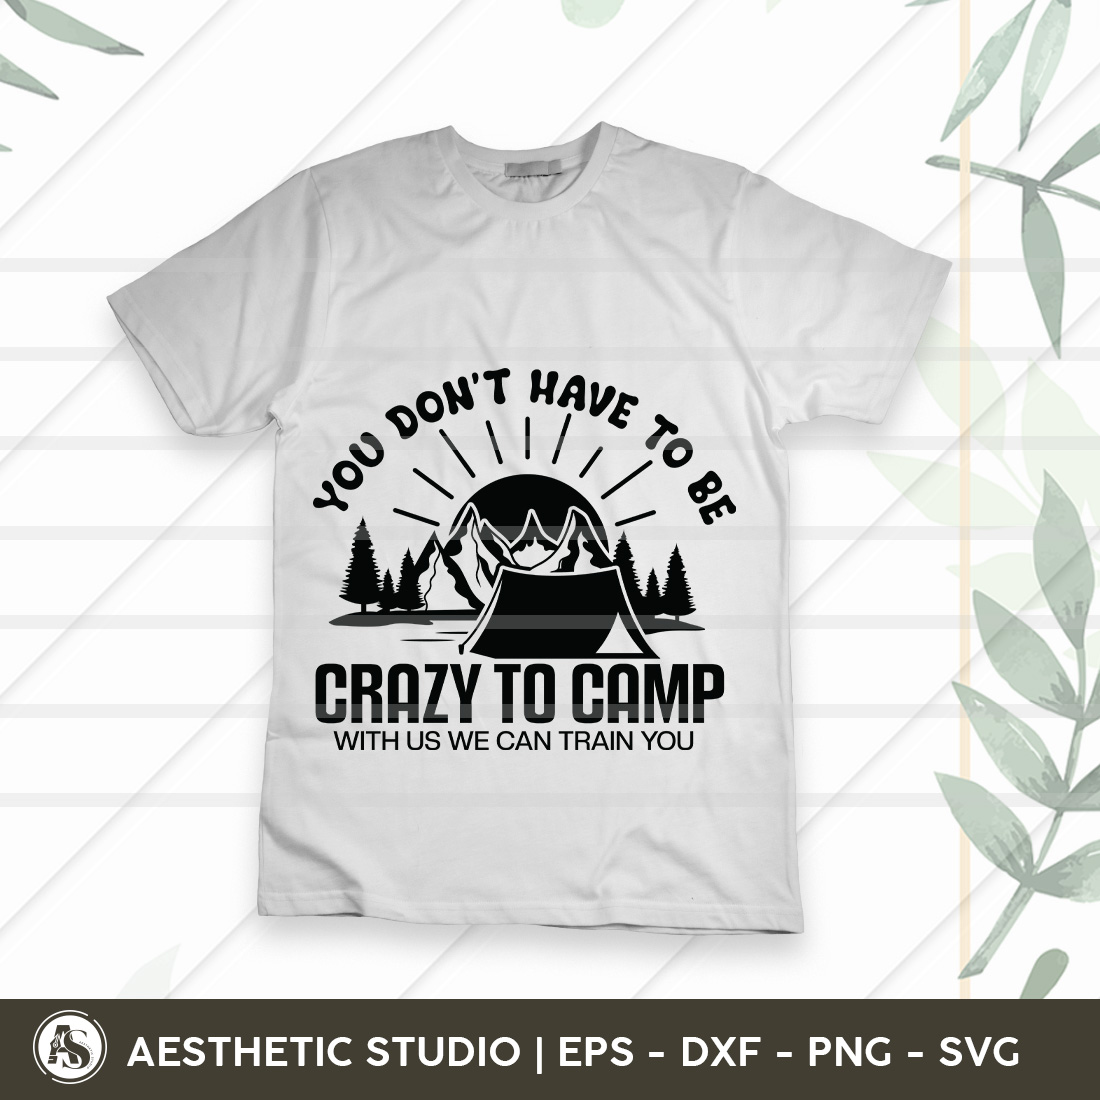 You Don't Have To Be Crazy To Camp With Us We Can Train You, Crazy Camping Friends, Camper, Adventure, Camp Life, Camping Svg, Typography, Camping Quotes, Camping Cut File, Funny Camping, Svg, Eps, Dxf, Png, Cut file preview image.